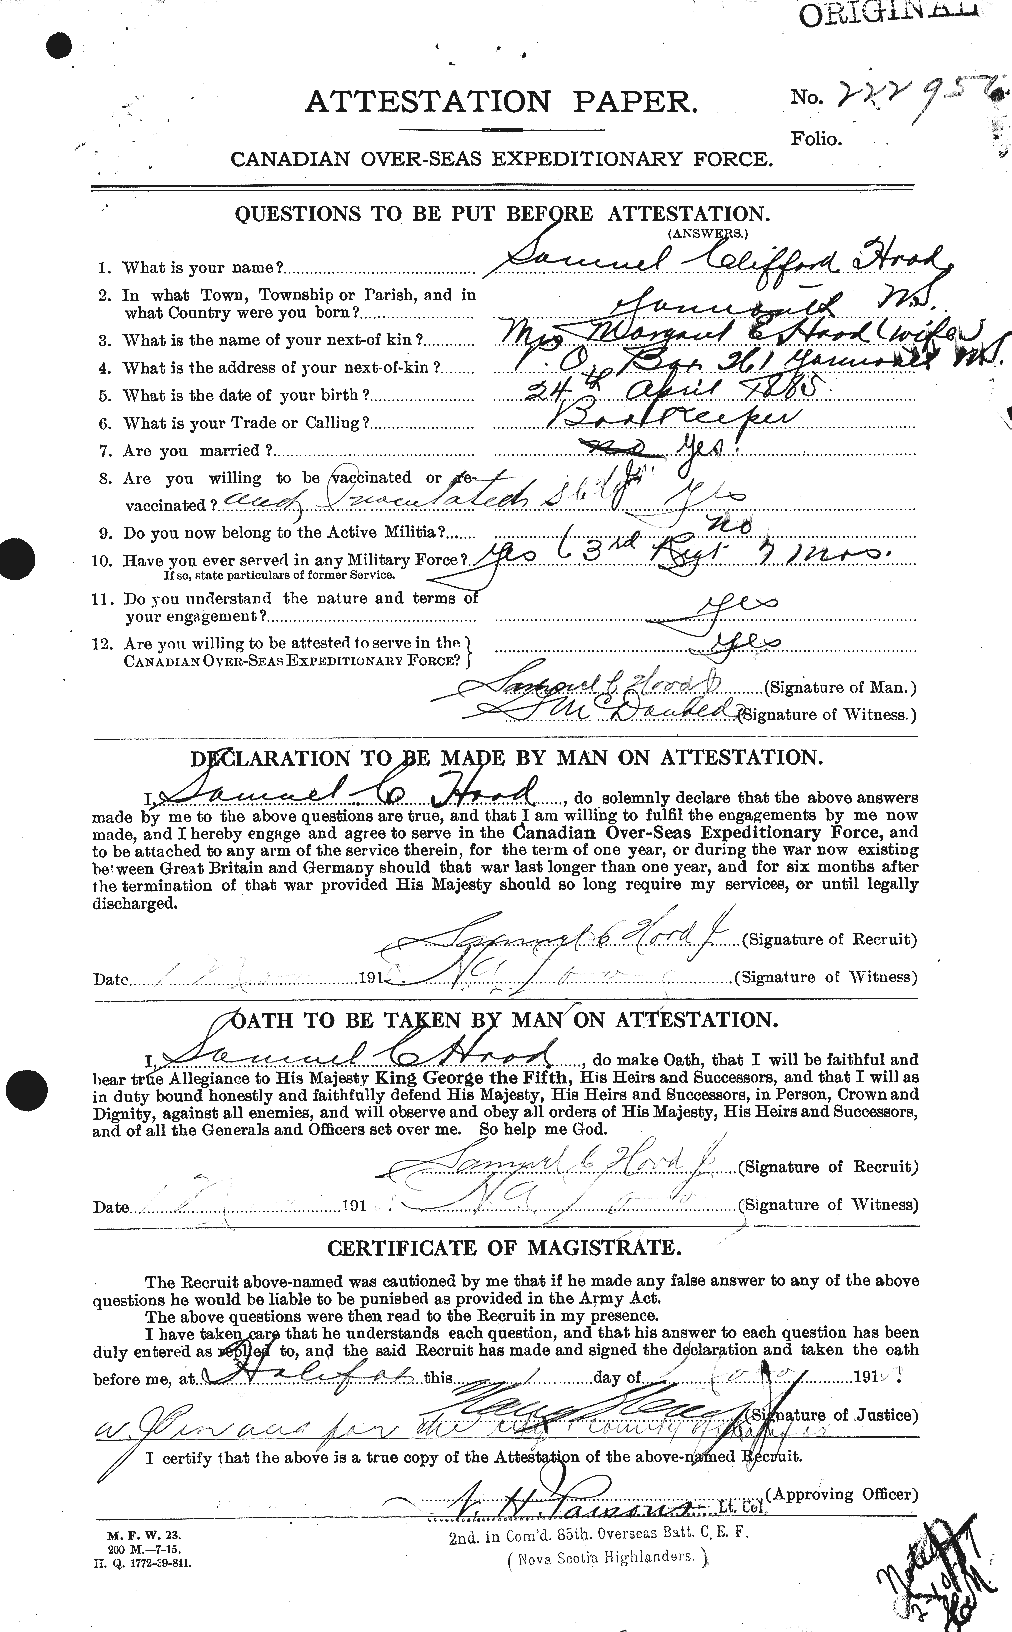 Personnel Records of the First World War - CEF 409379a